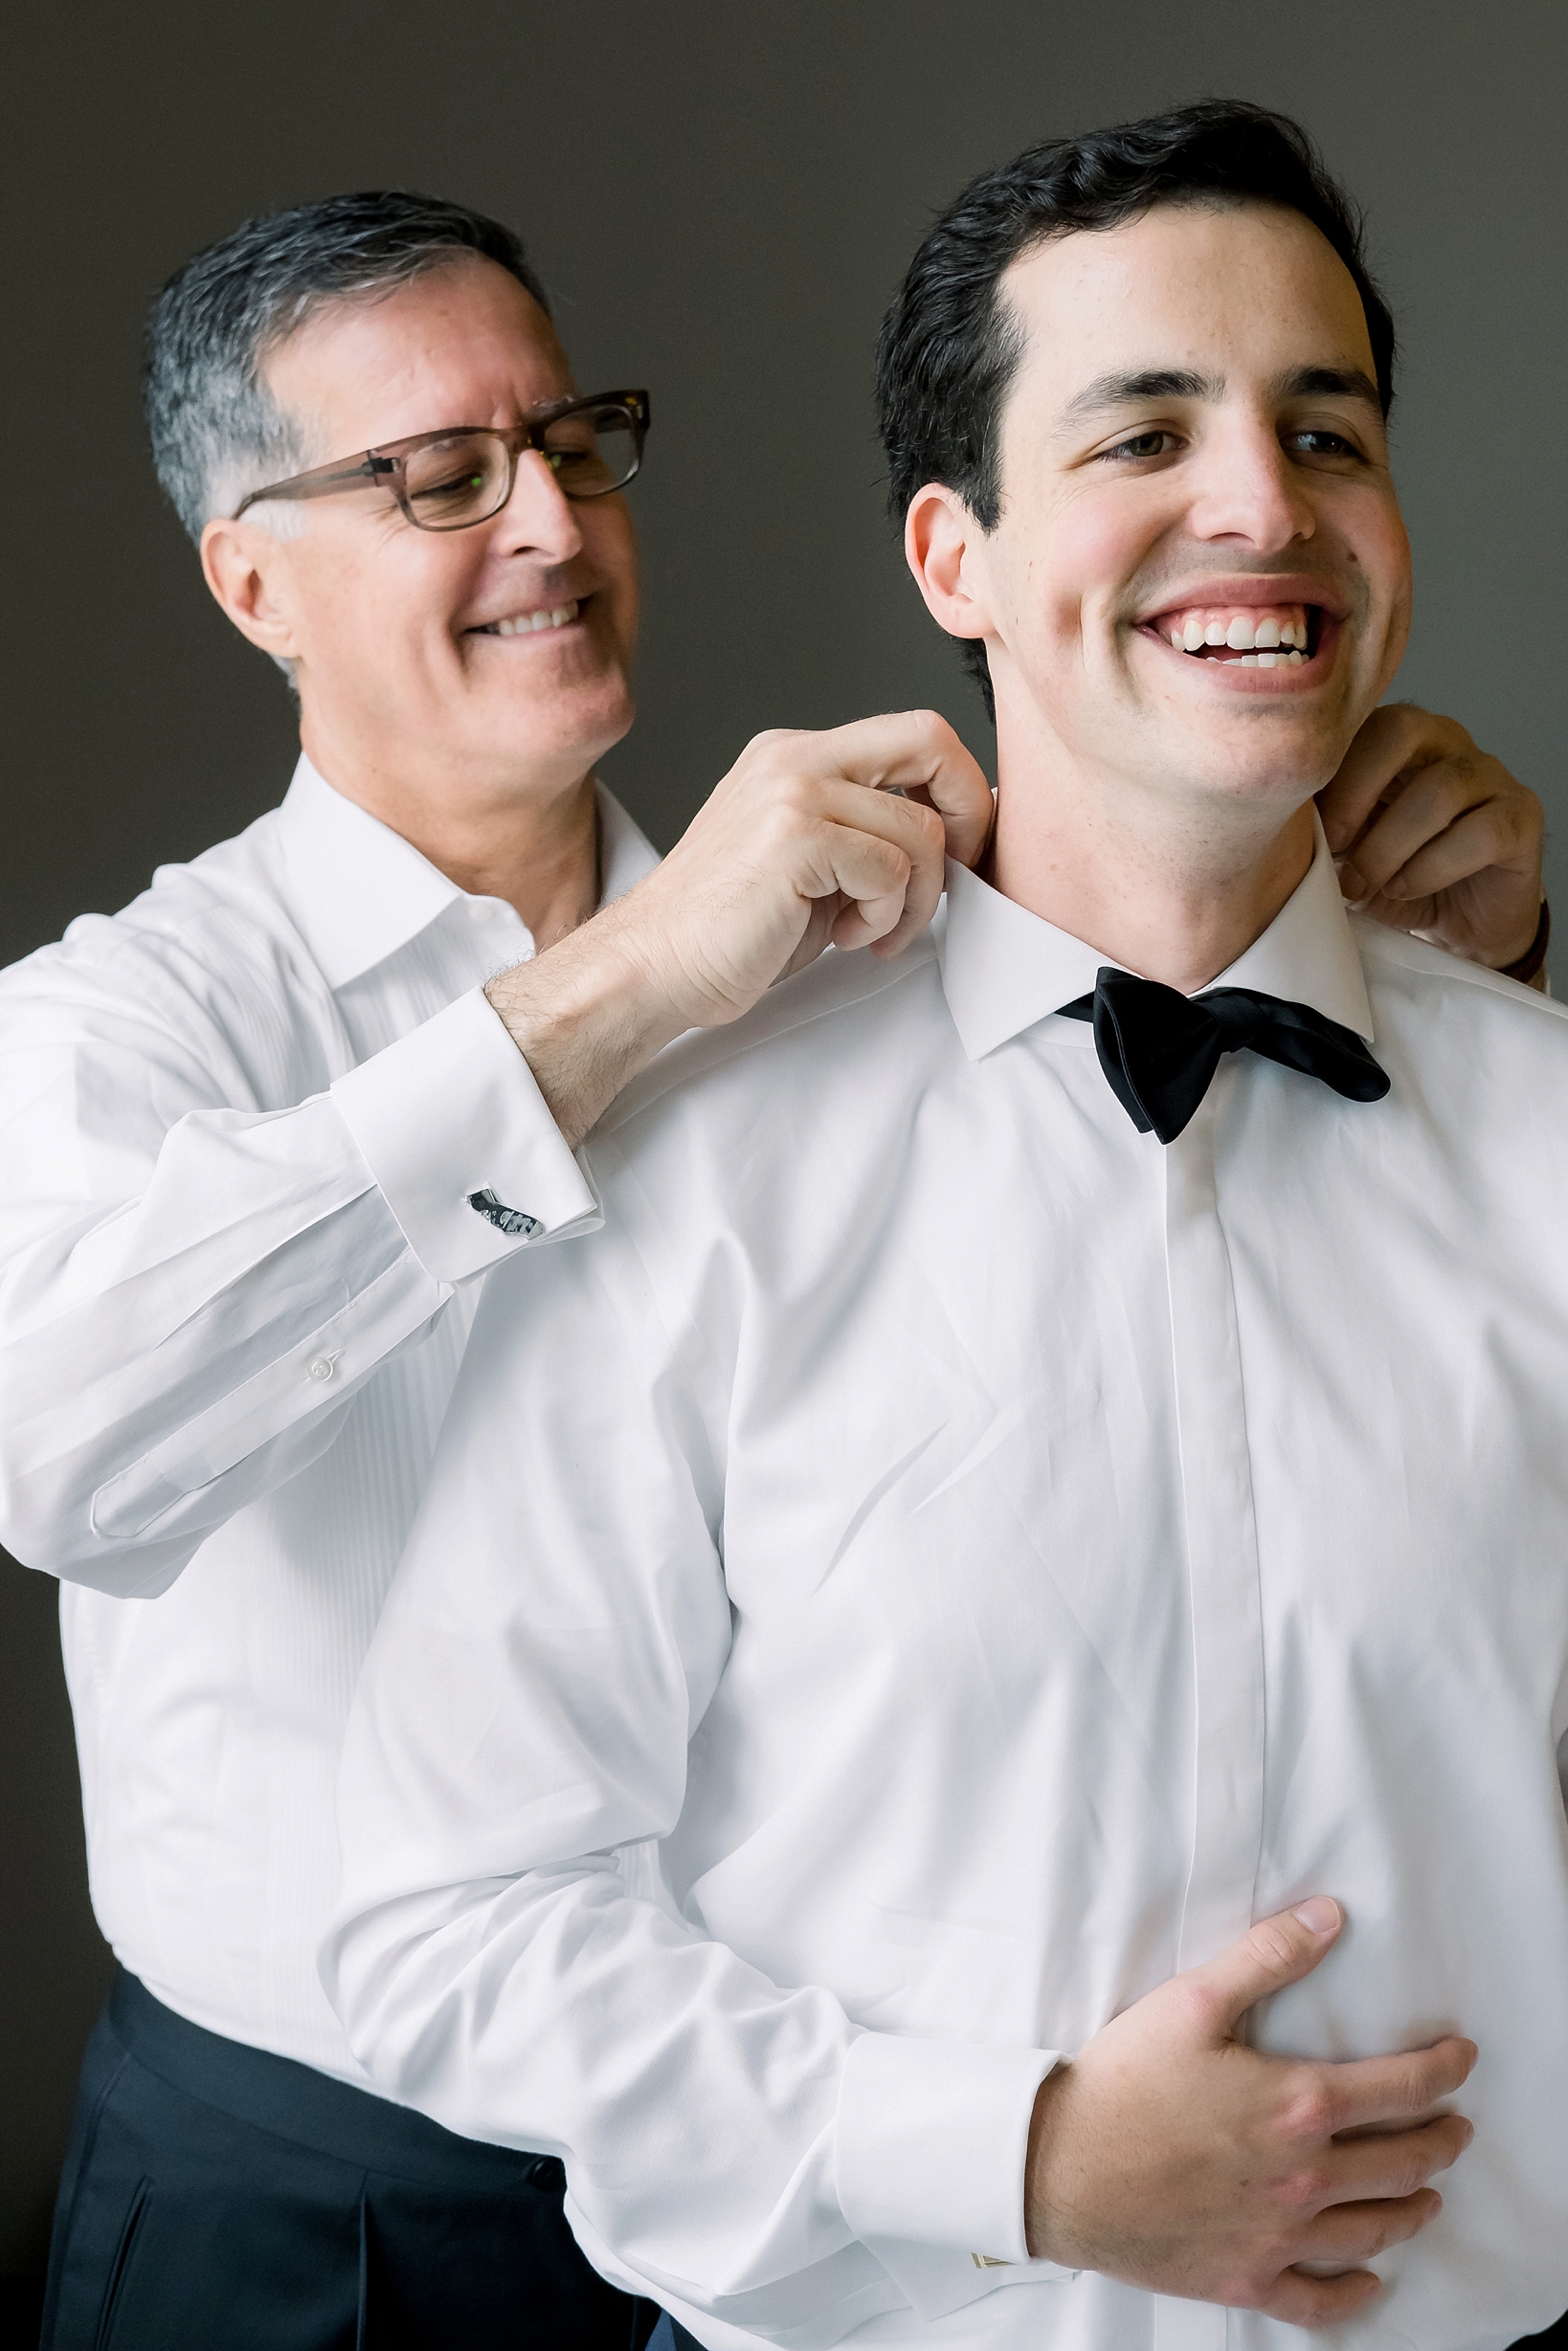 The groom's father helping put his sons bow tie on before the wedding ceremony by Sarah & Ben Photography